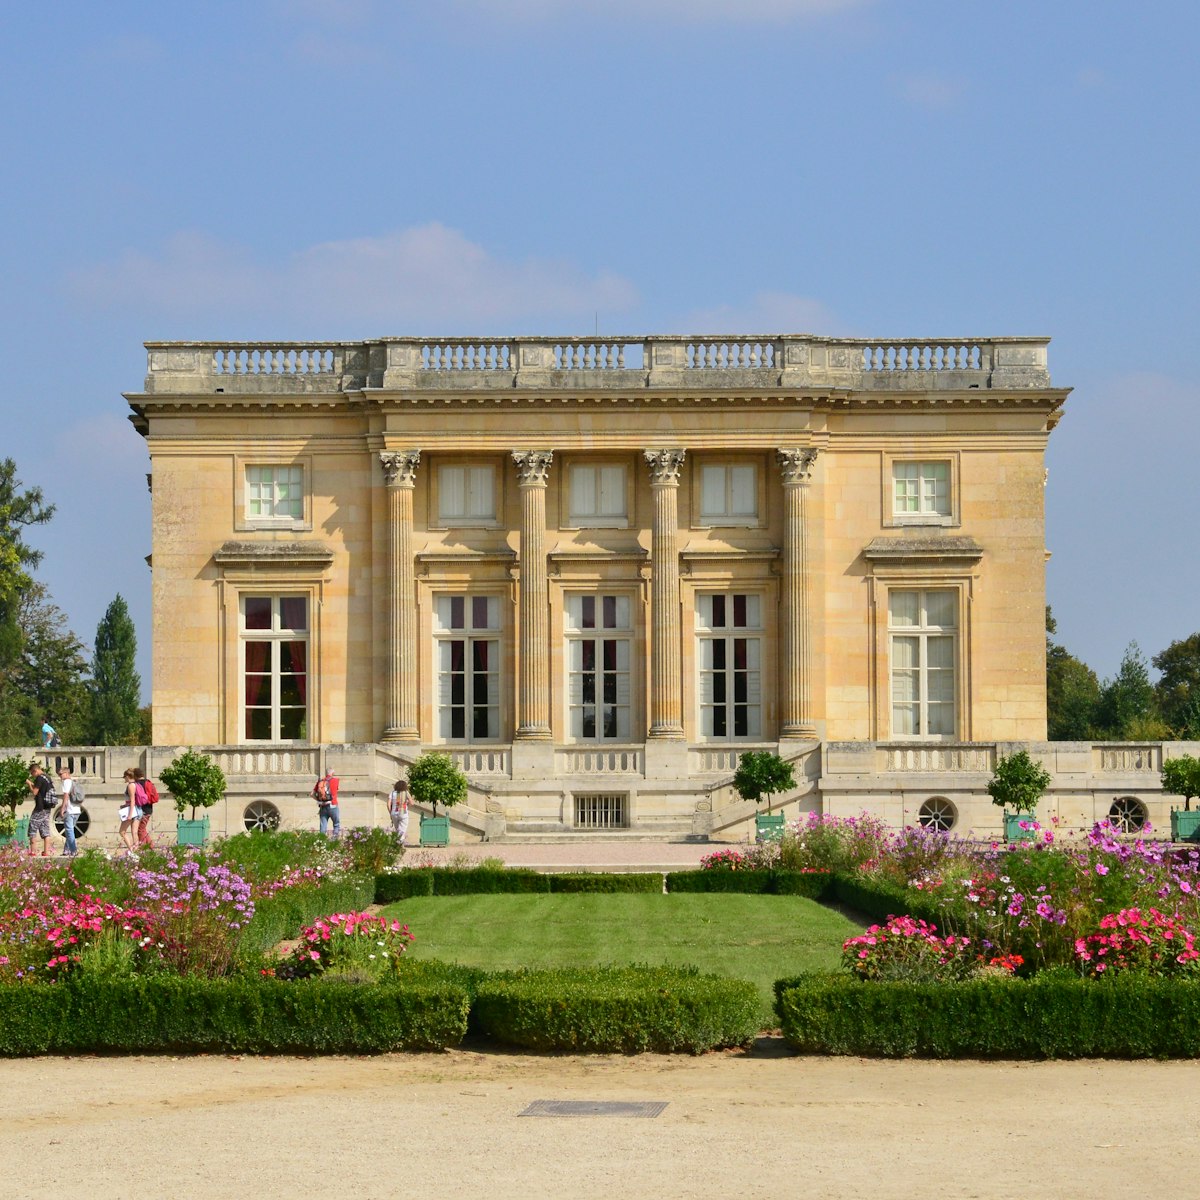 The Petit Trianon in the park of Versailles Palace.